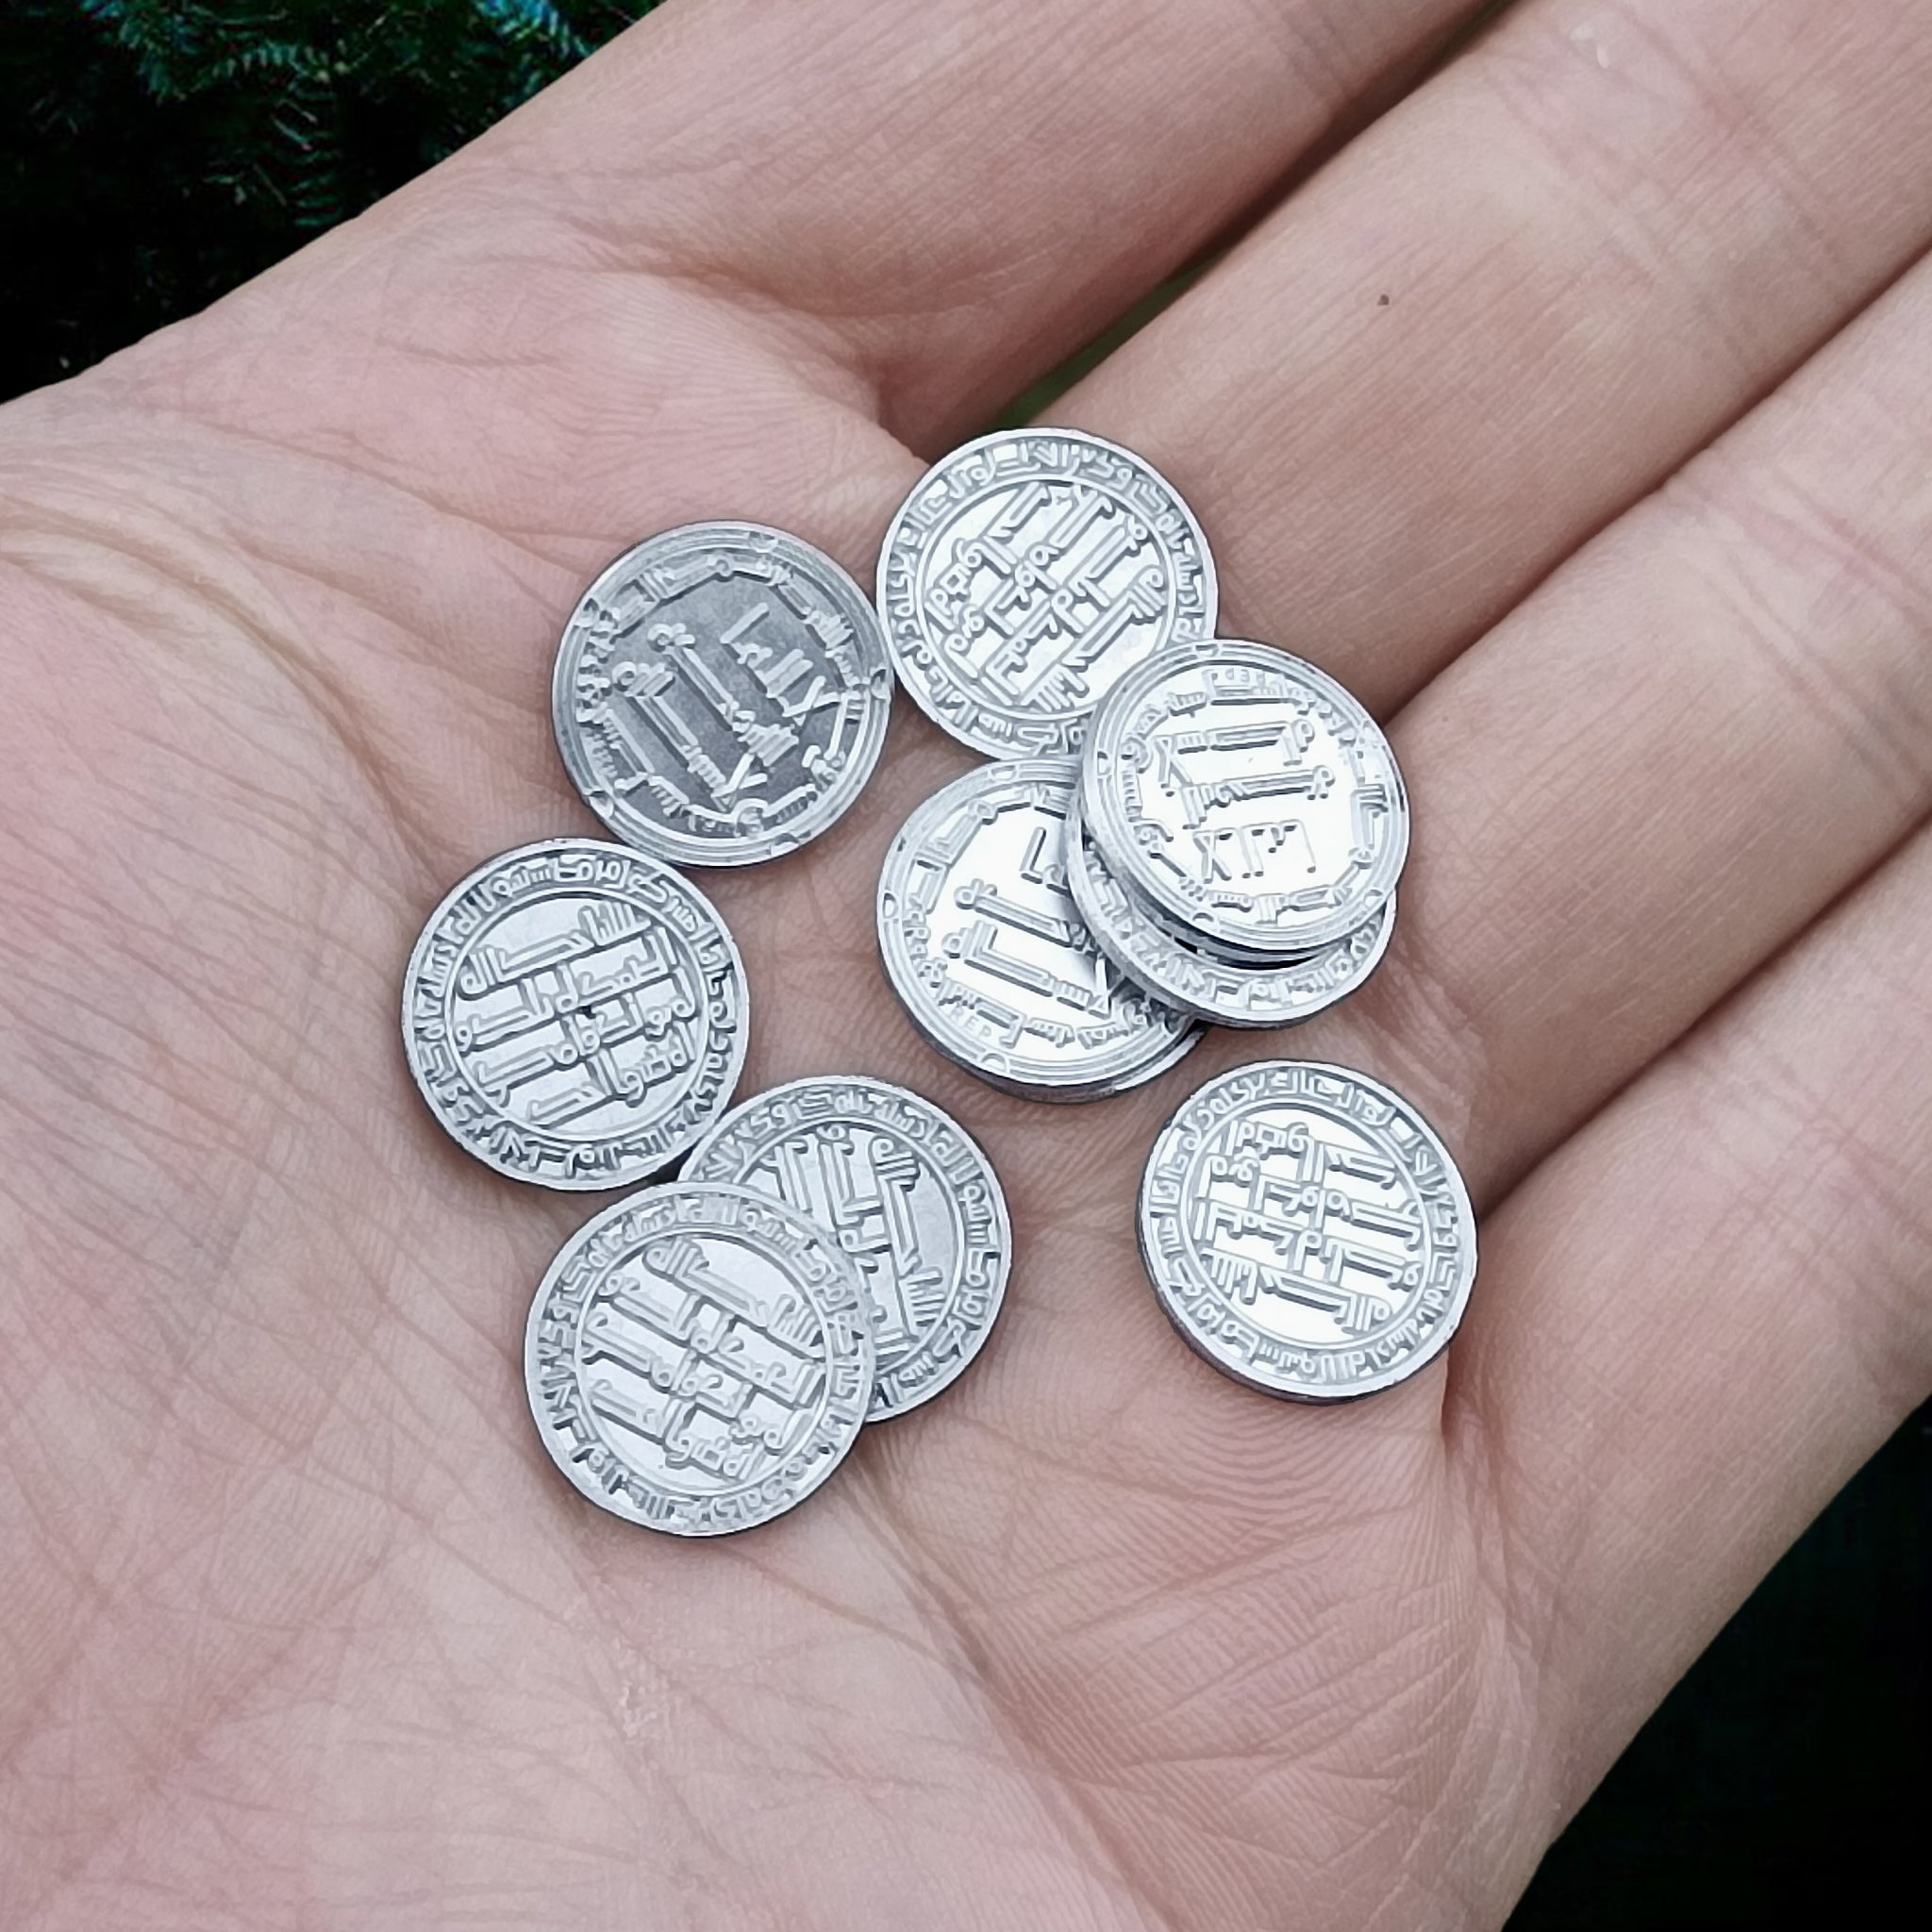 Replica Coins x 10 in hand, from the Isle of Skye - 10th Century Scotland, UK